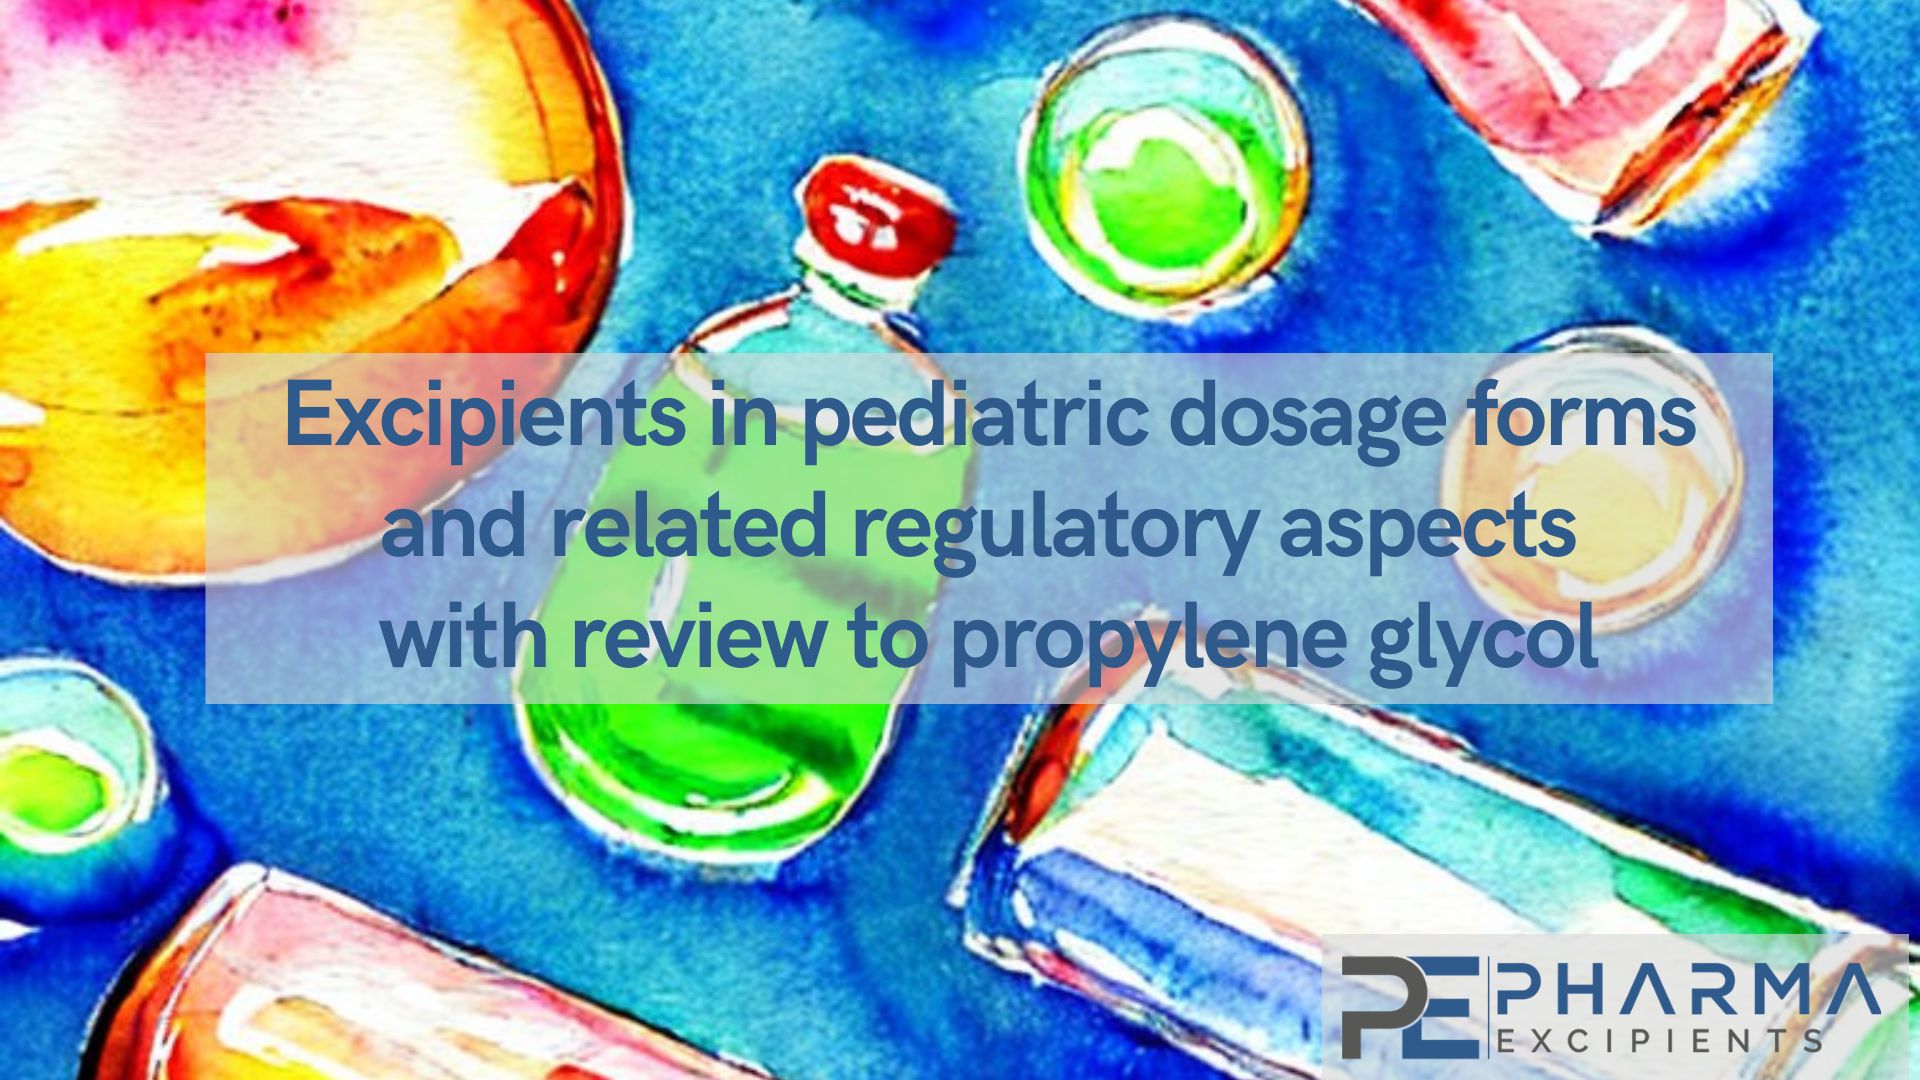 Excipients in pediatric dosage forms and related regulatory aspects with review to propylene glycol